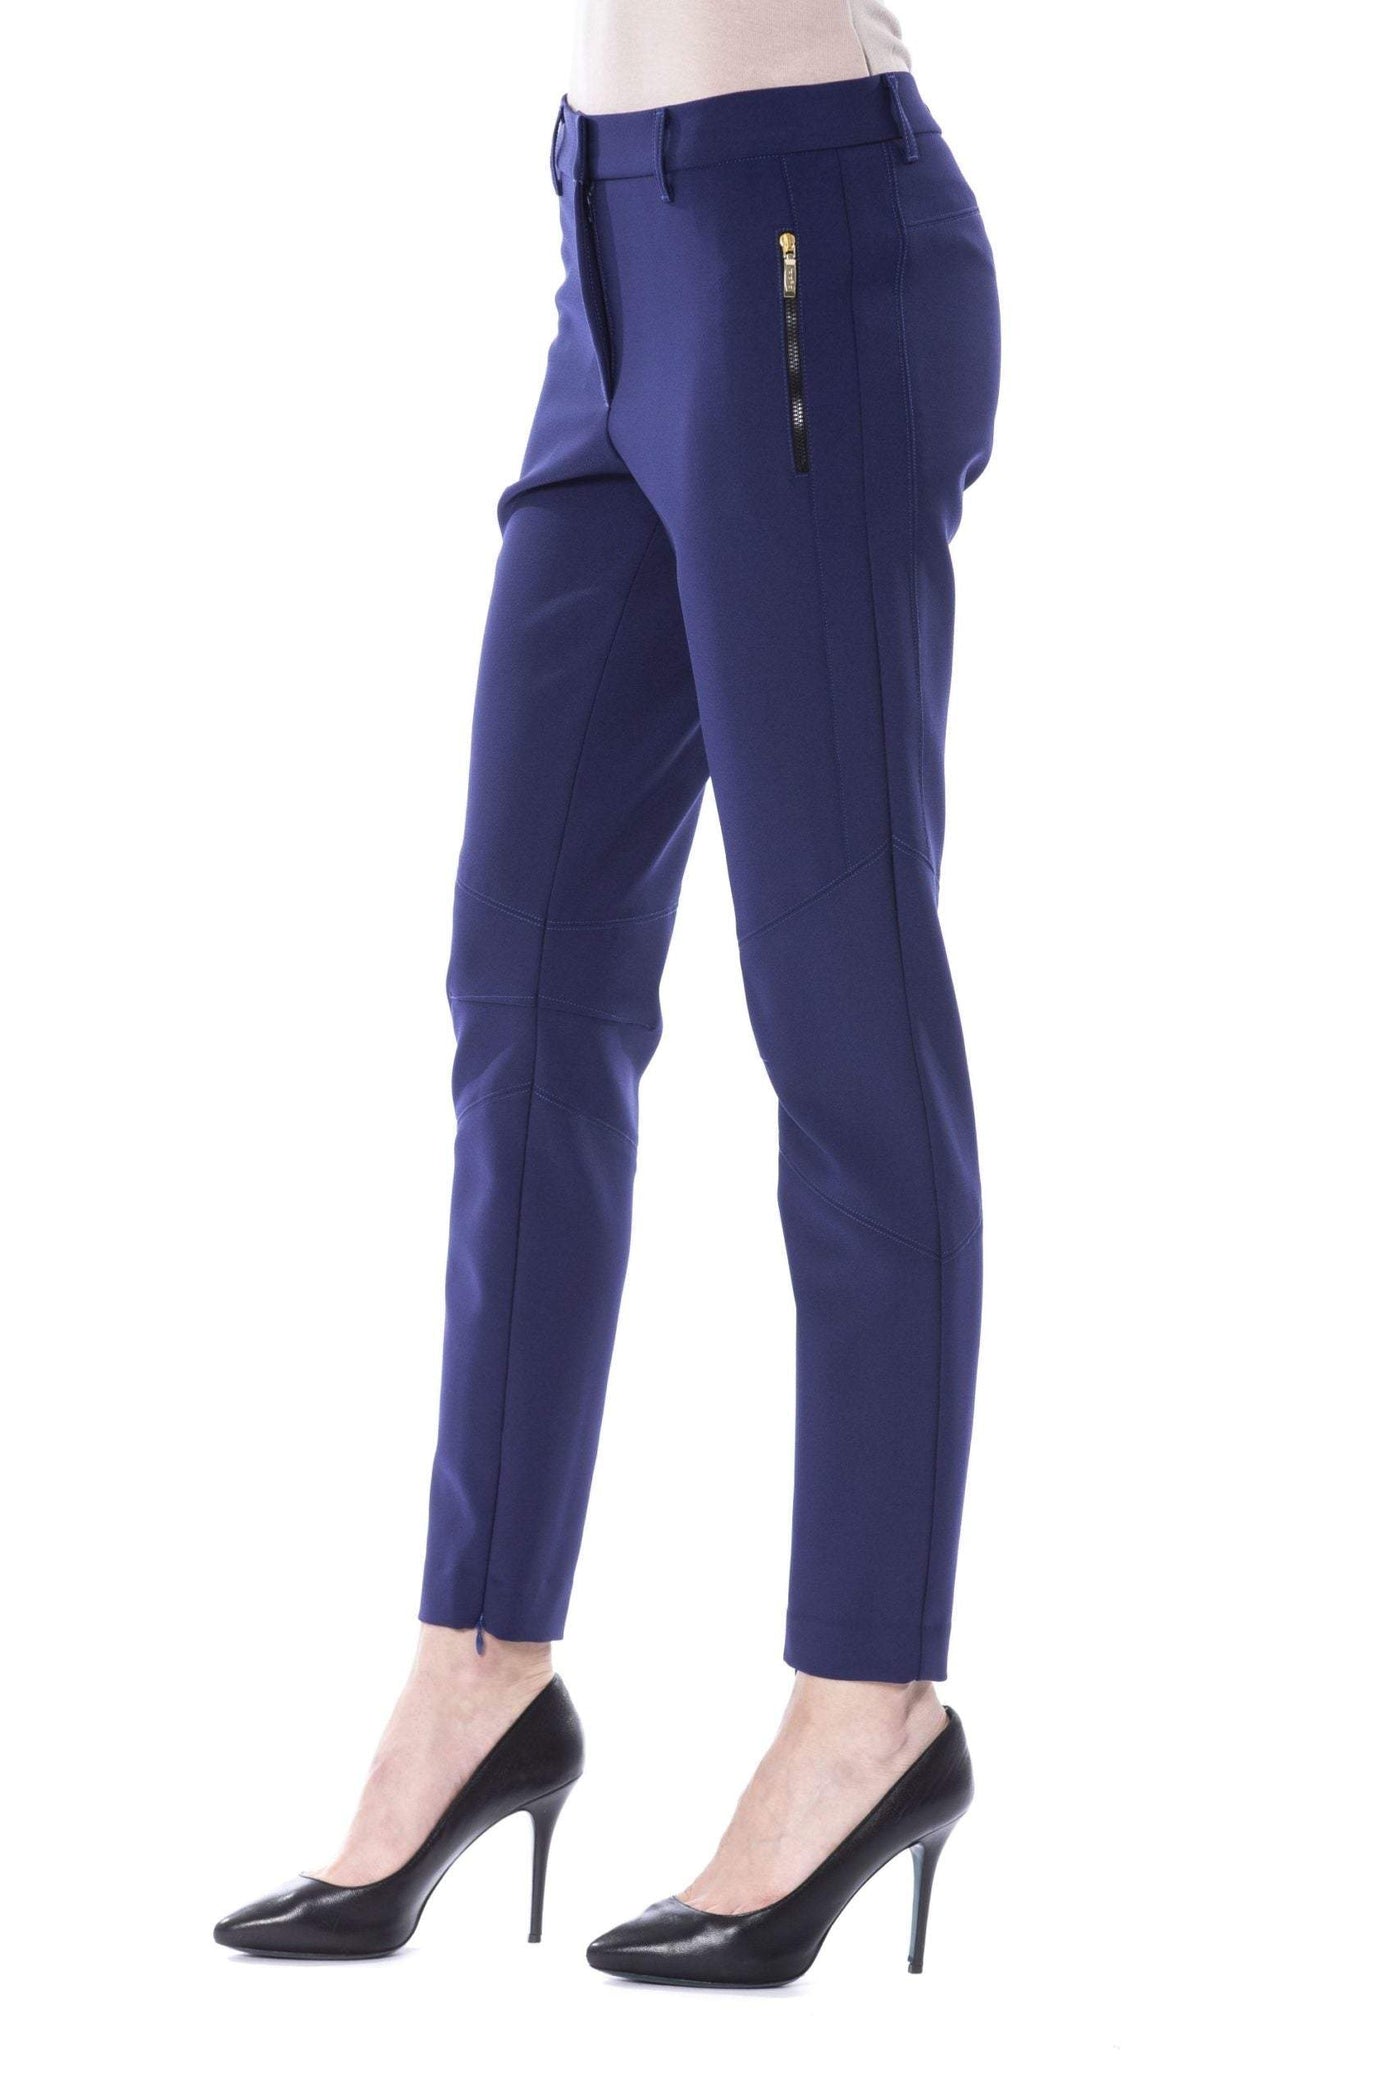 BYBLOS slim fit Jeans & Pant #women, Blue, BYBLOS, feed-agegroup-adult, feed-color-Blue, feed-gender-female, IT42 | S, IT44 | M, IT46 | L, IT48 | XL, Jeans & Pants - Women - Clothing at SEYMAYKA